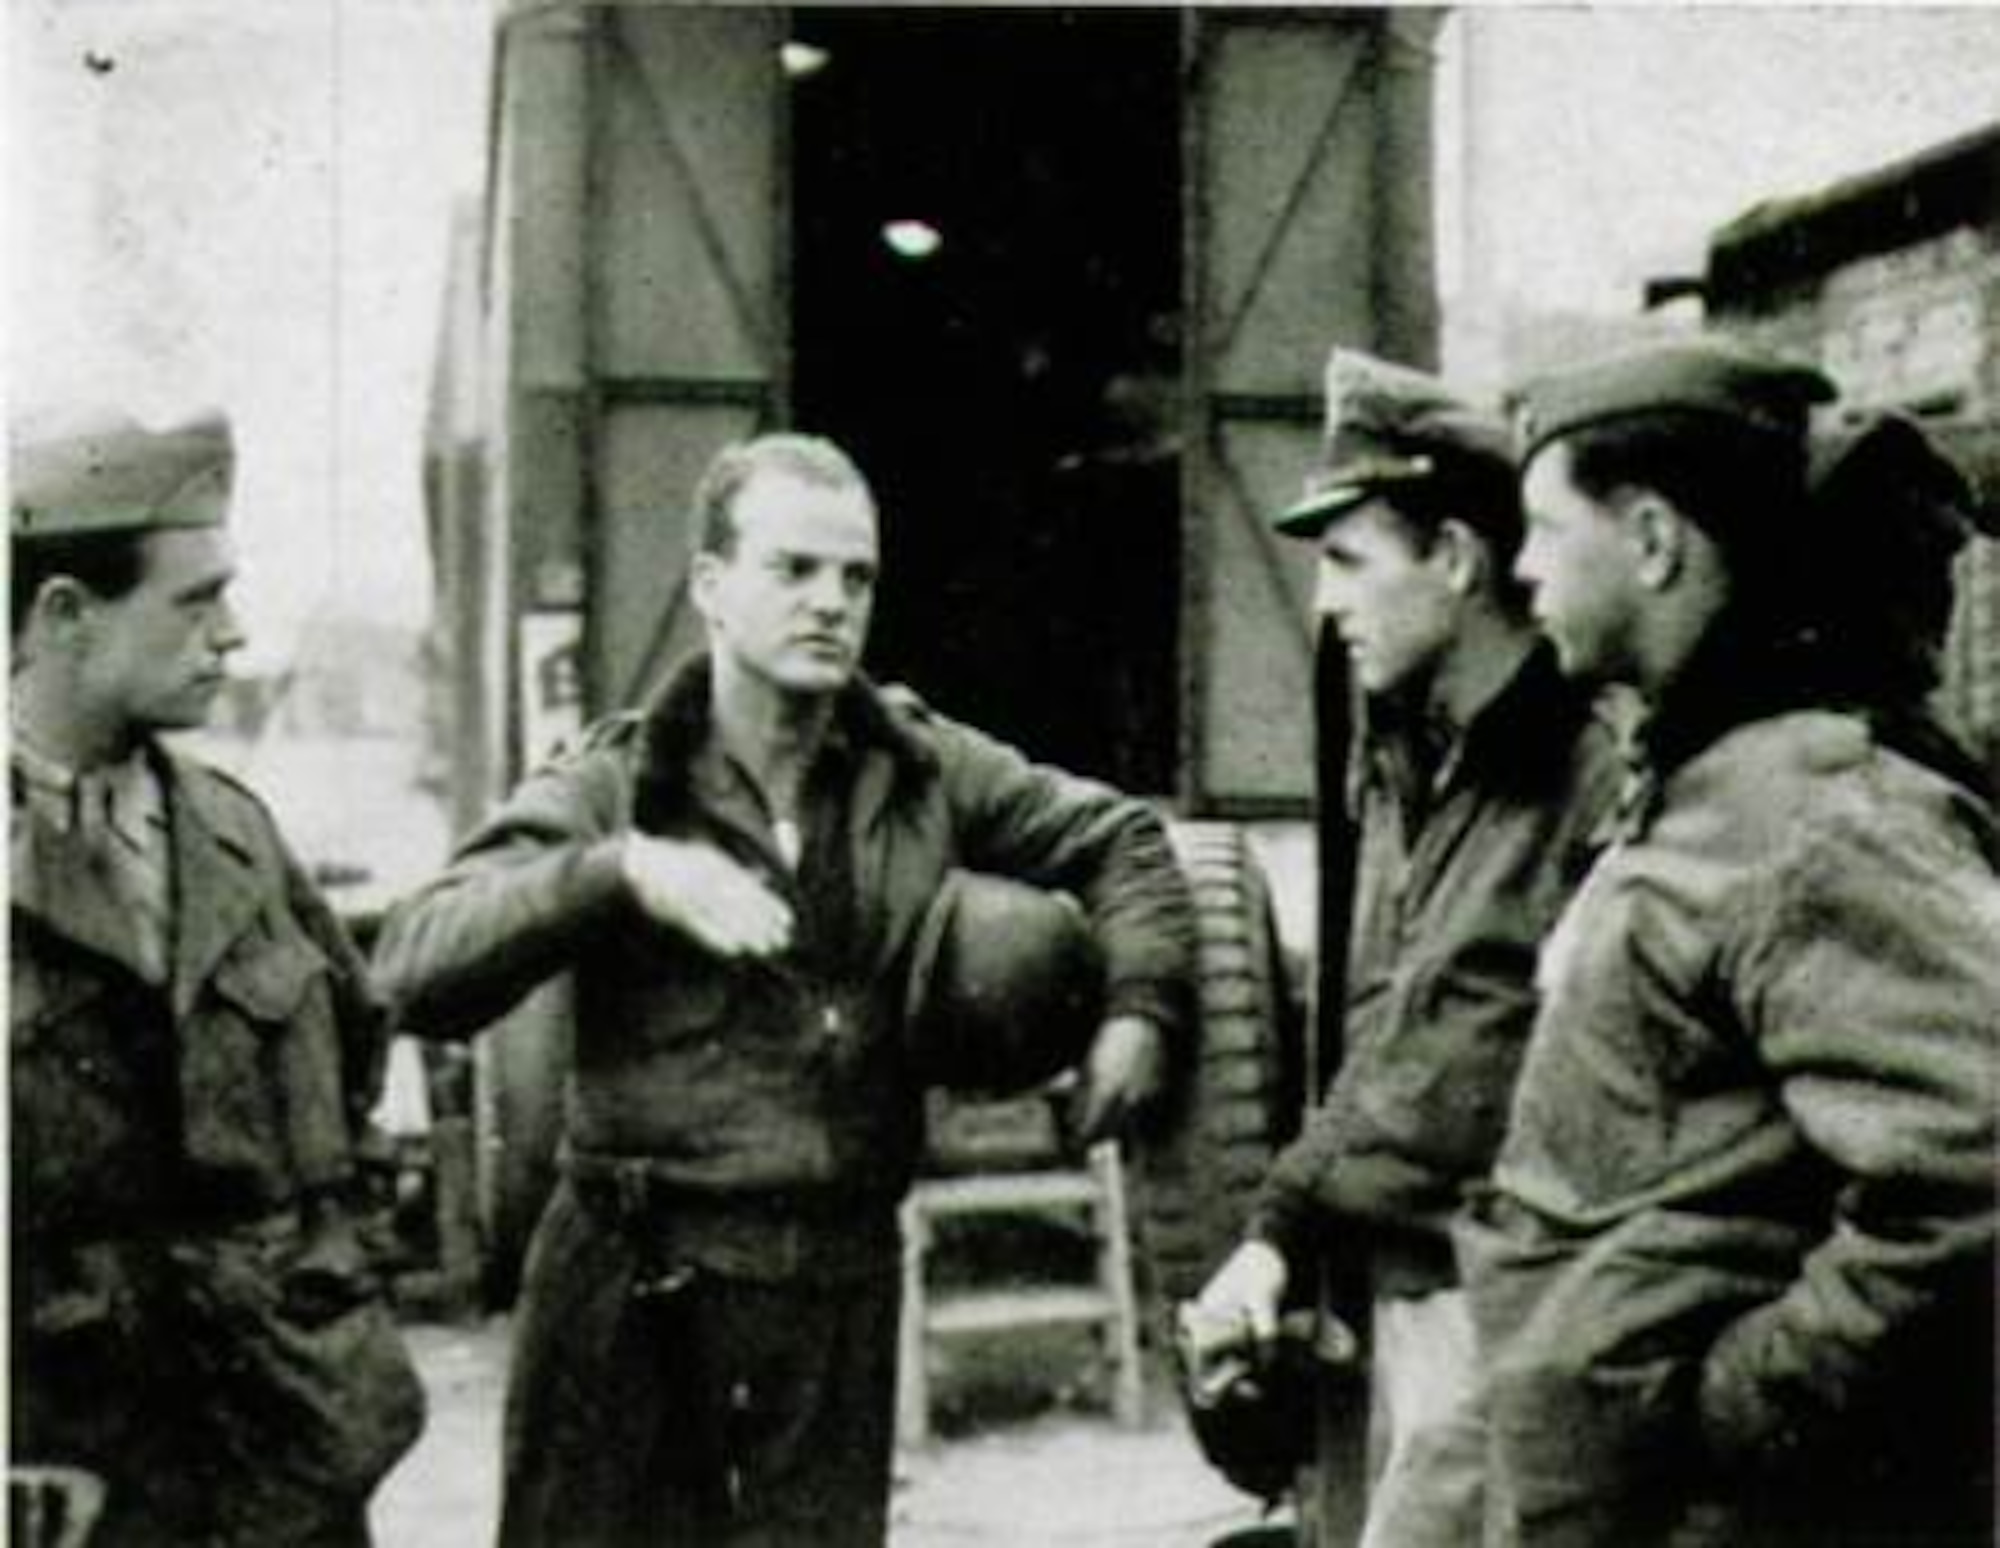 First Lieutenant Edward R. Kirkland, from Coral Gables, Florida, gesturing with hand to unidentified personnel, flew in the 406th Fighter Squadron and had an exciting story to tell after returning to the unit following his shoot down, capture and escape.  As seen here, for pilots some things are better explained by hands.  (The Story of the 371st Fighter Group in the E.T.O.)

